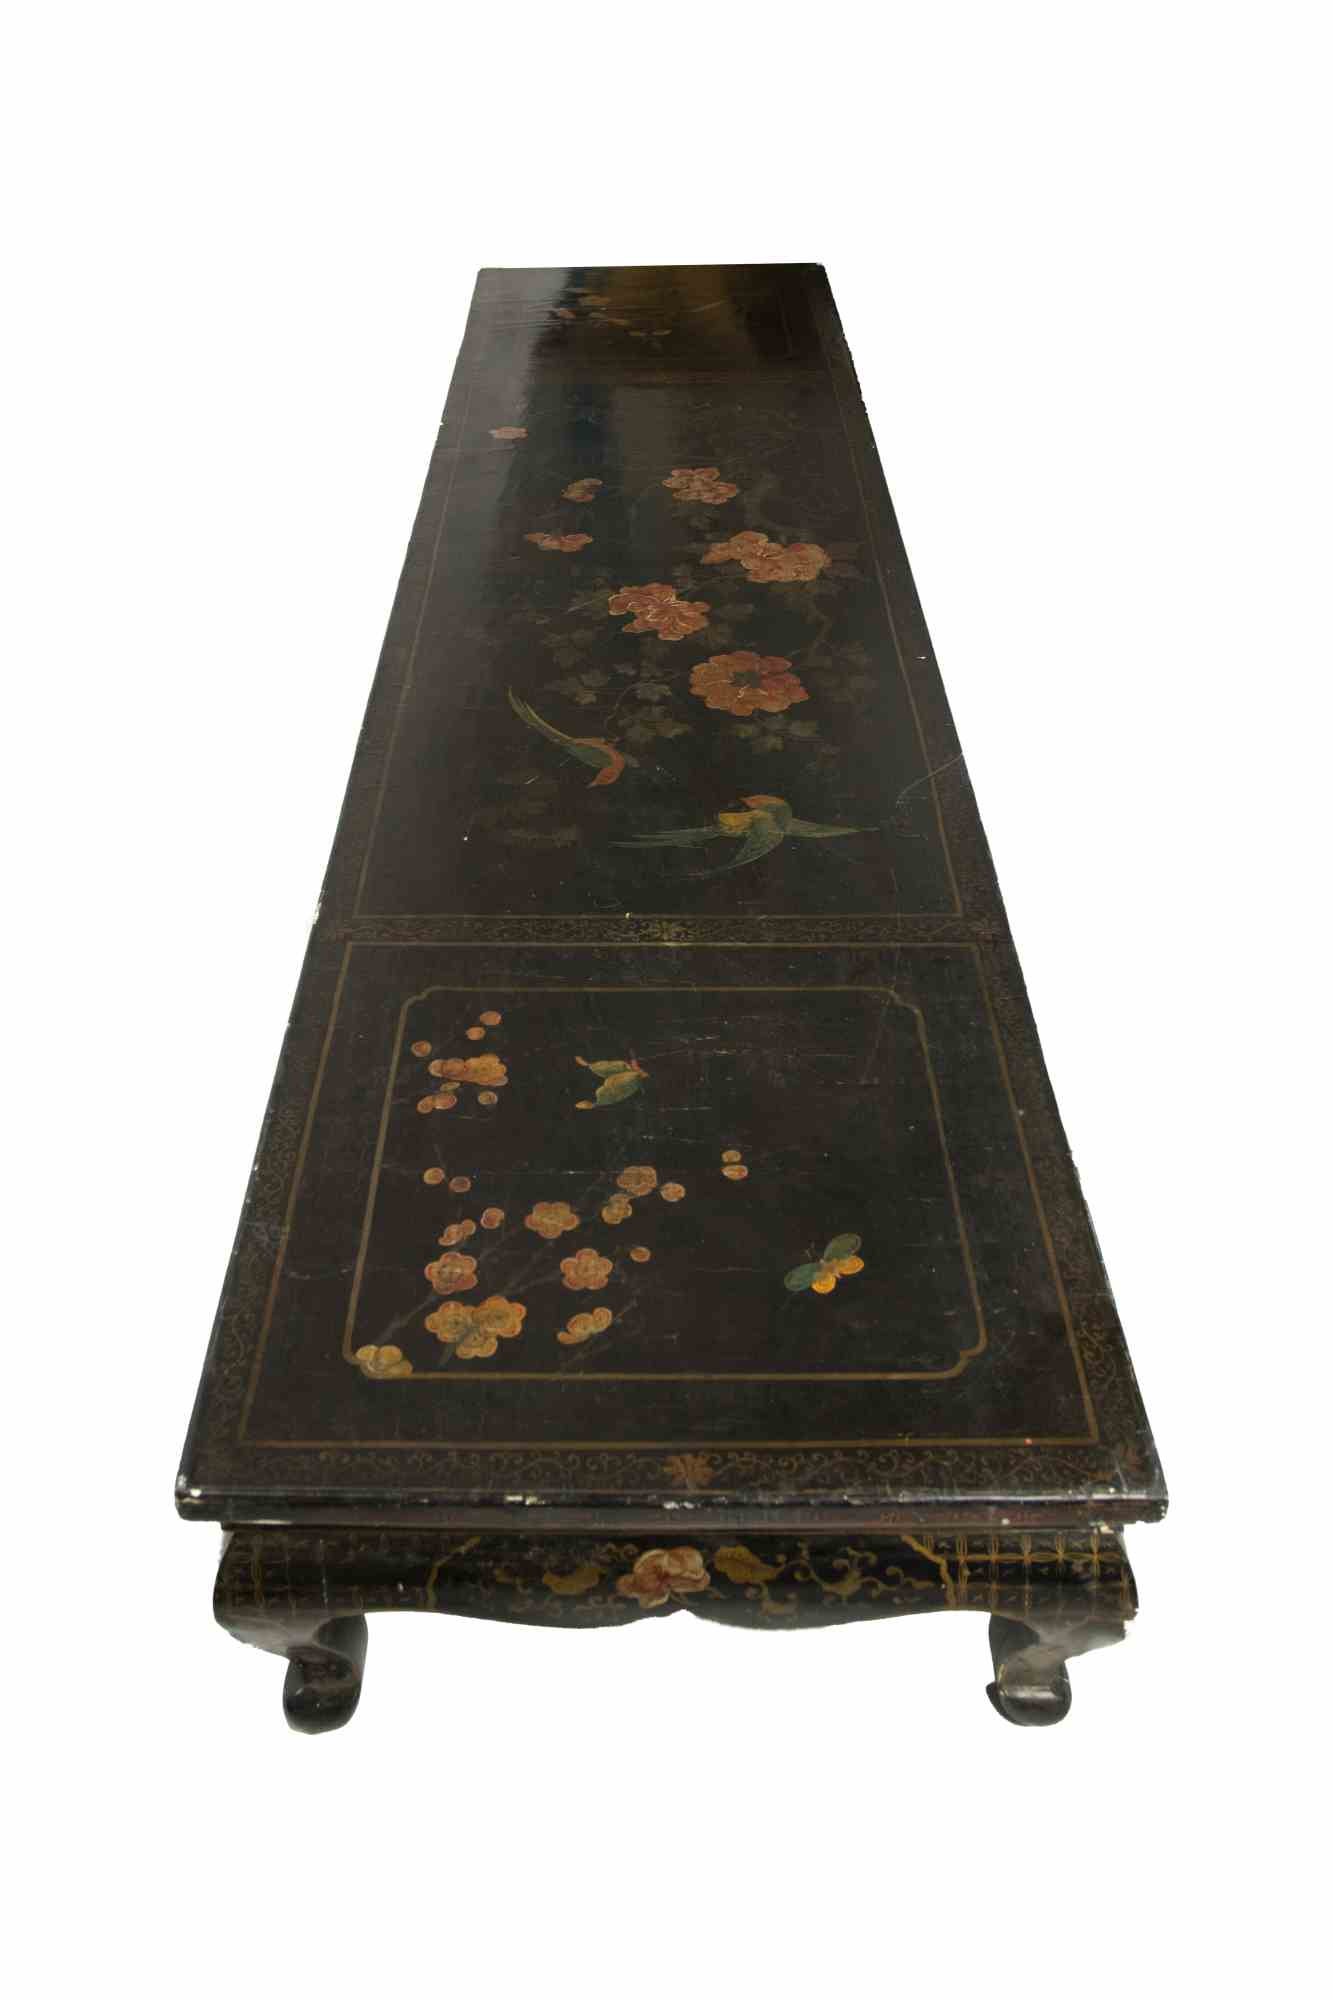 Antique Japanese Table is an original design furniture item realized in the early 20th century by an artisanal Japanese manufacturer.

An elegant wooden table decorated with precious inlaid floral motifs on the top.

Good conditions except for